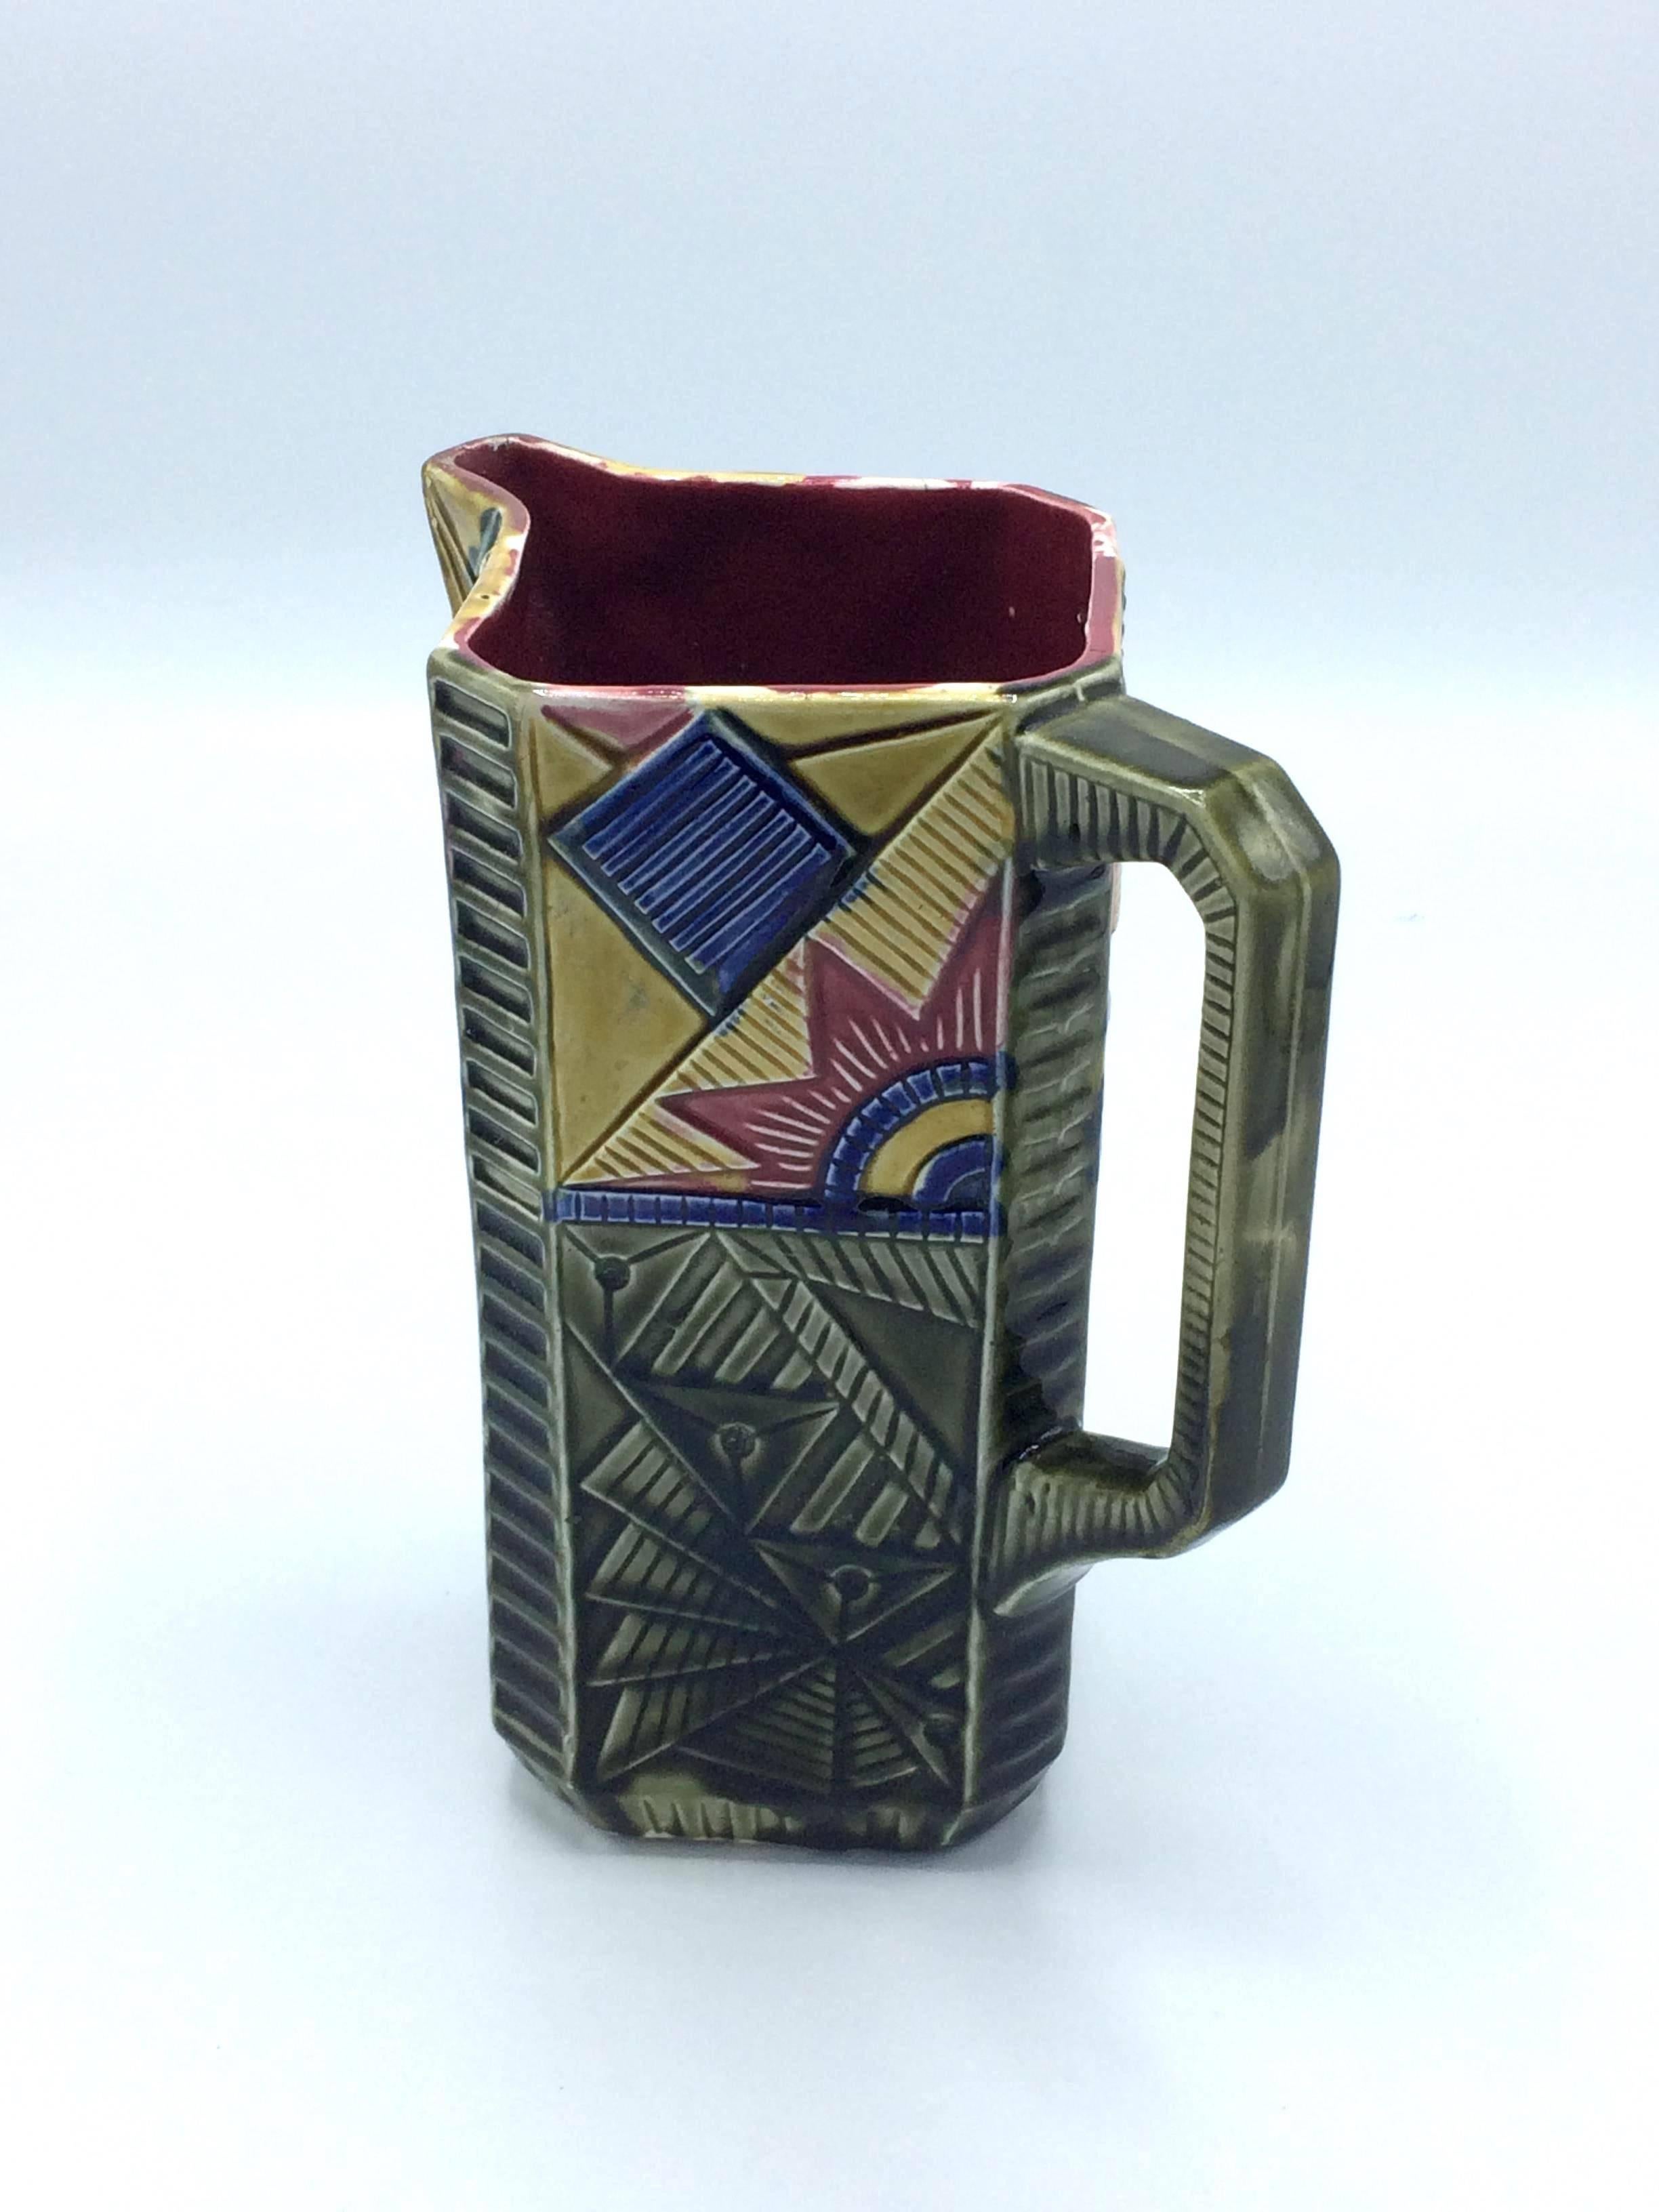 Amazing Majolica Art Deco pitcher by Onnaing.
Signed on the bottom.